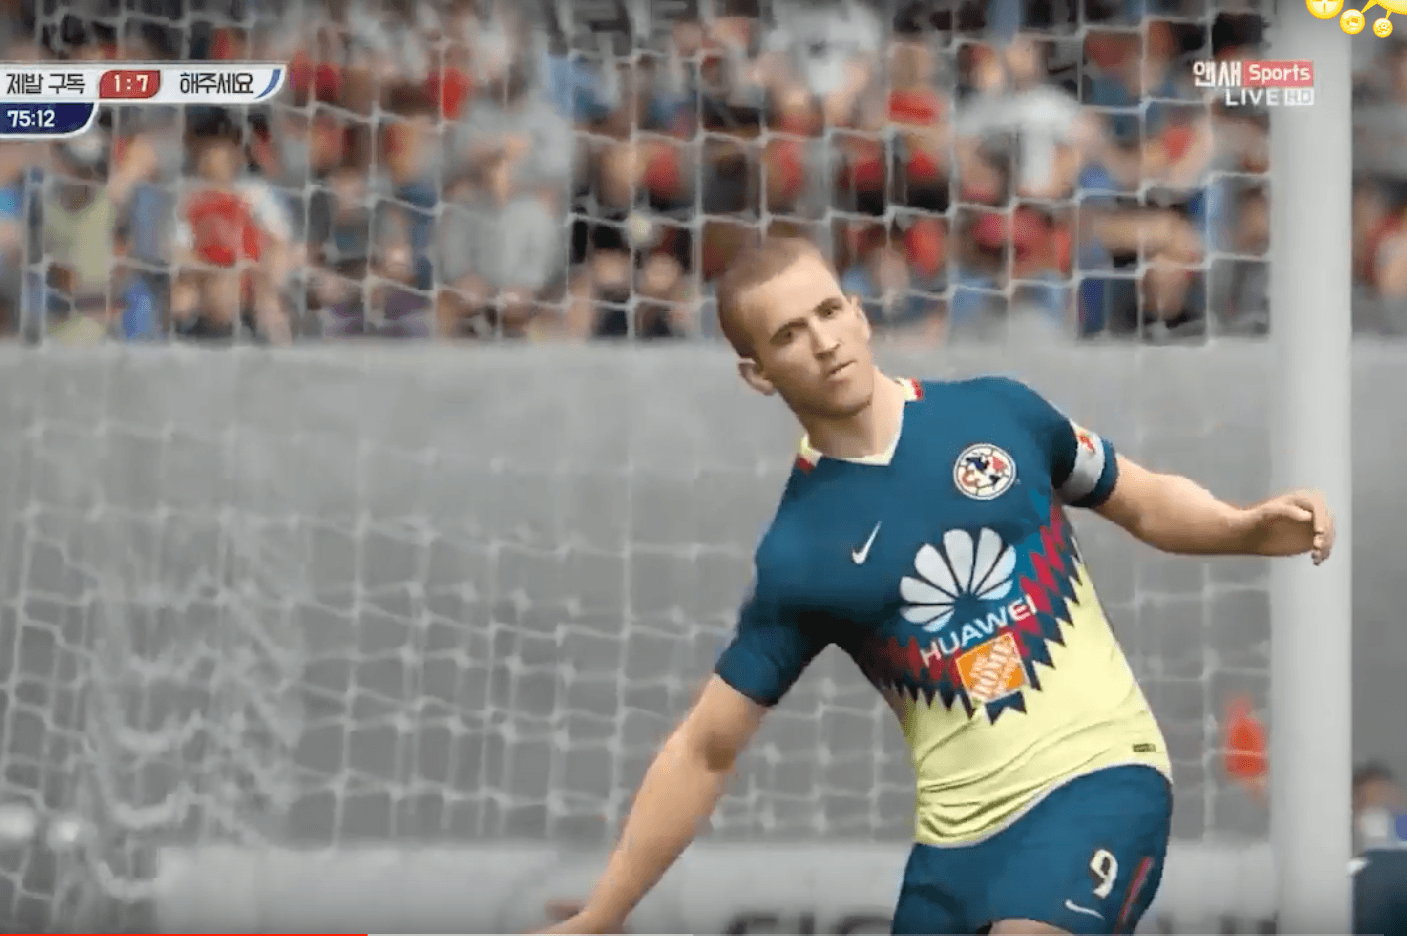 Review Harry Kane 18 TOTY FIFA online 4